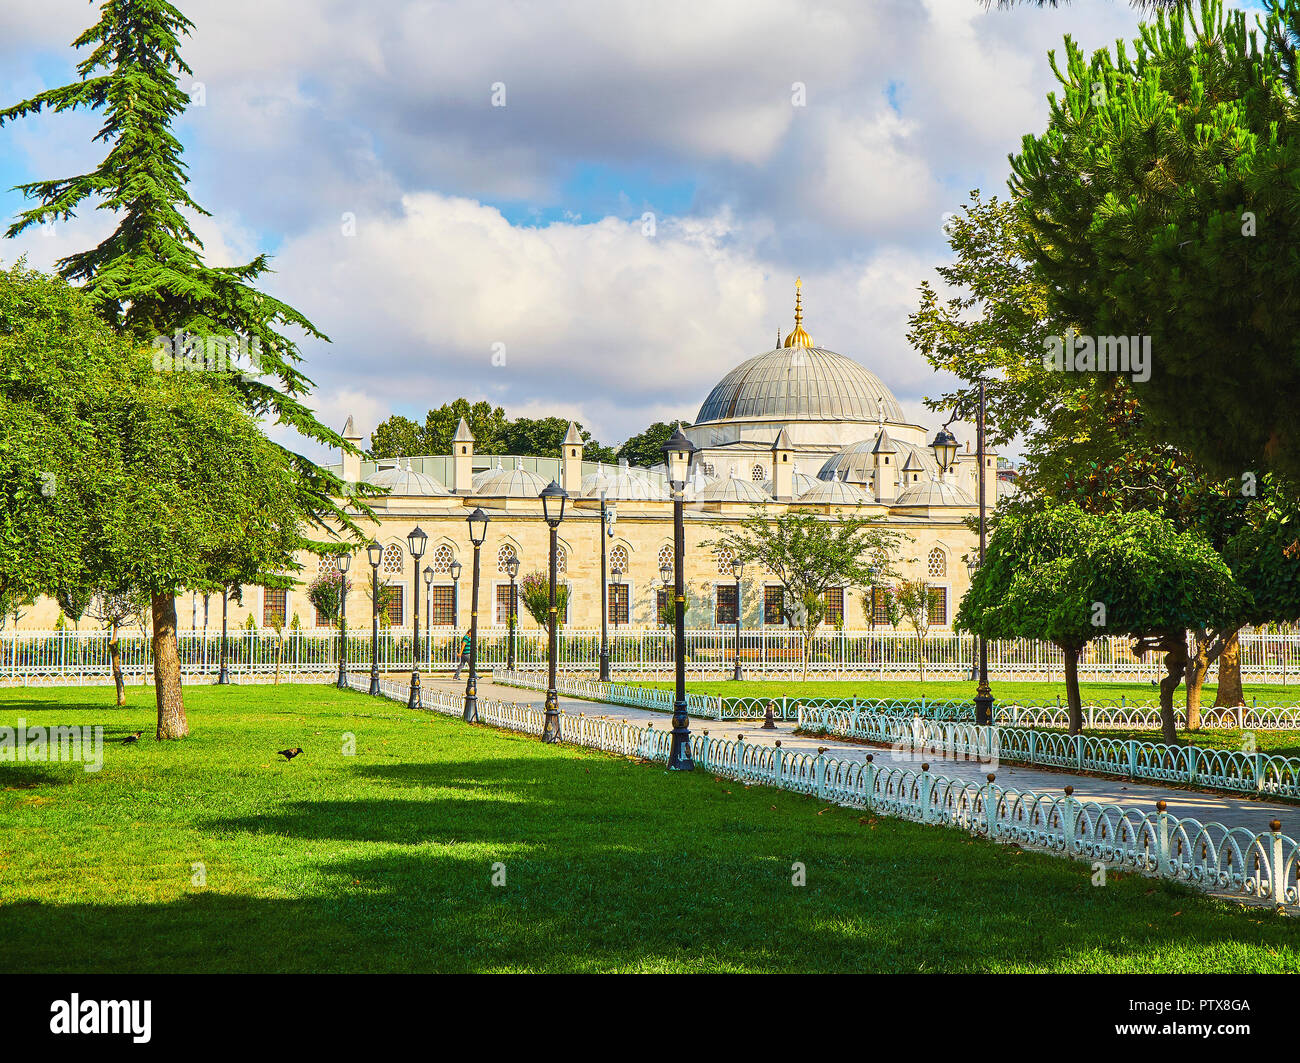 Sultanahmet Park, facing The Tomb of Sultan Ahmet I, on the north side of The Sultan Ahmet Mosque. Istanbul, Turkey. Stock Photo